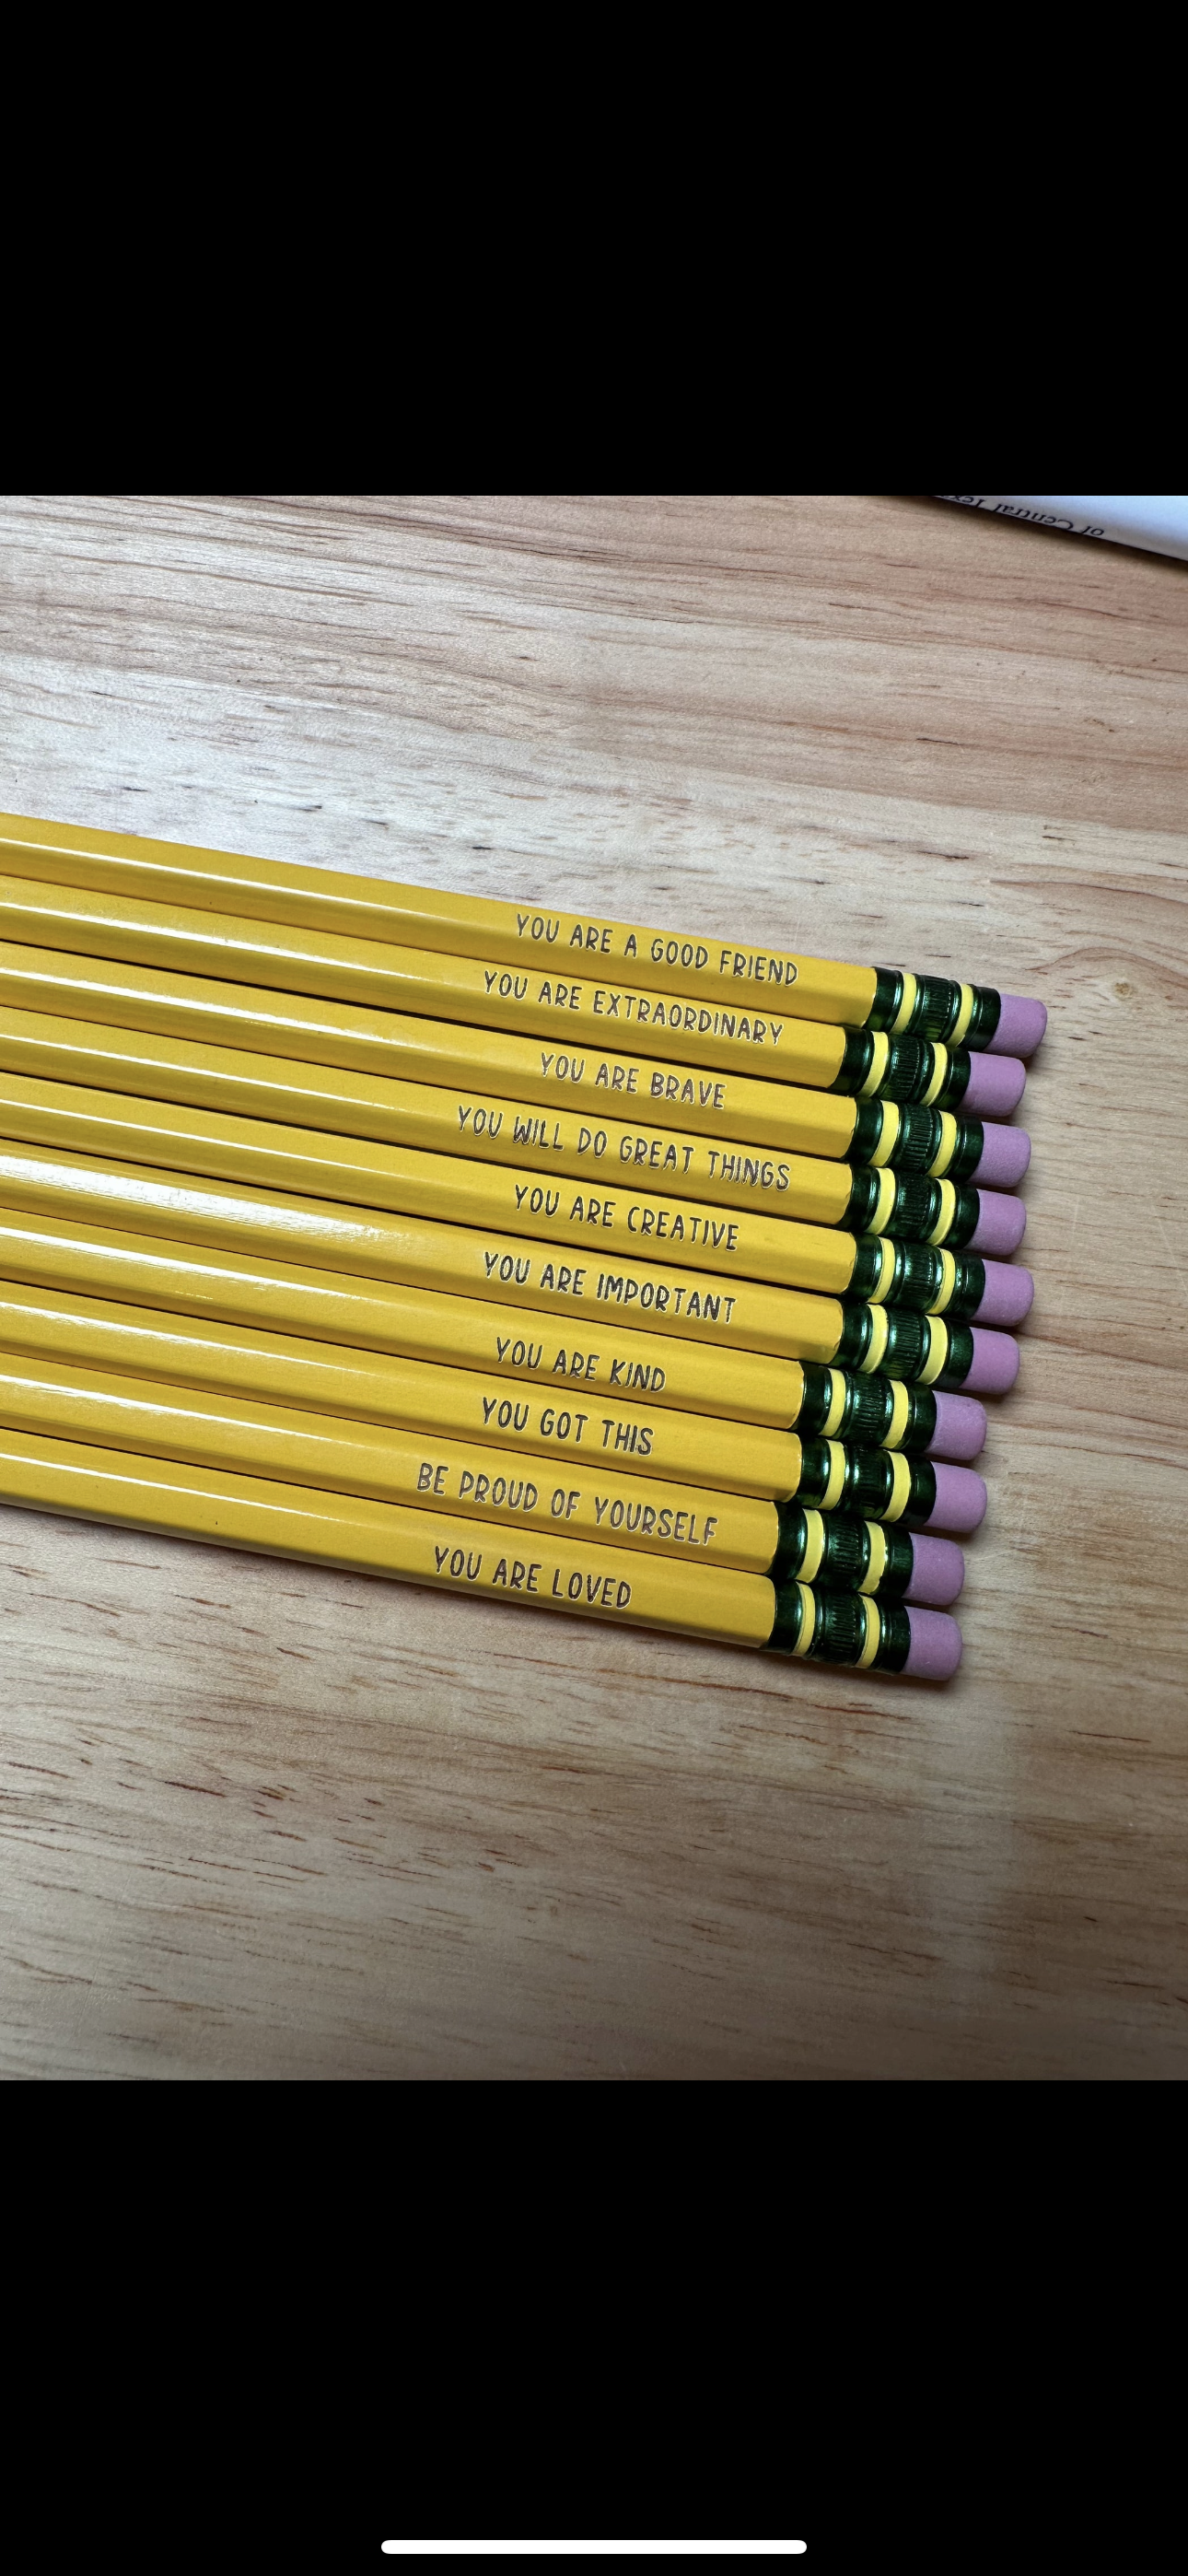 Clearance Affirmation Pencil Set Inspirational Pencils Personalized  Motivational Praise Wooden Pencils Pencil Set For Sketching And Drawing For  Students And Teachers 